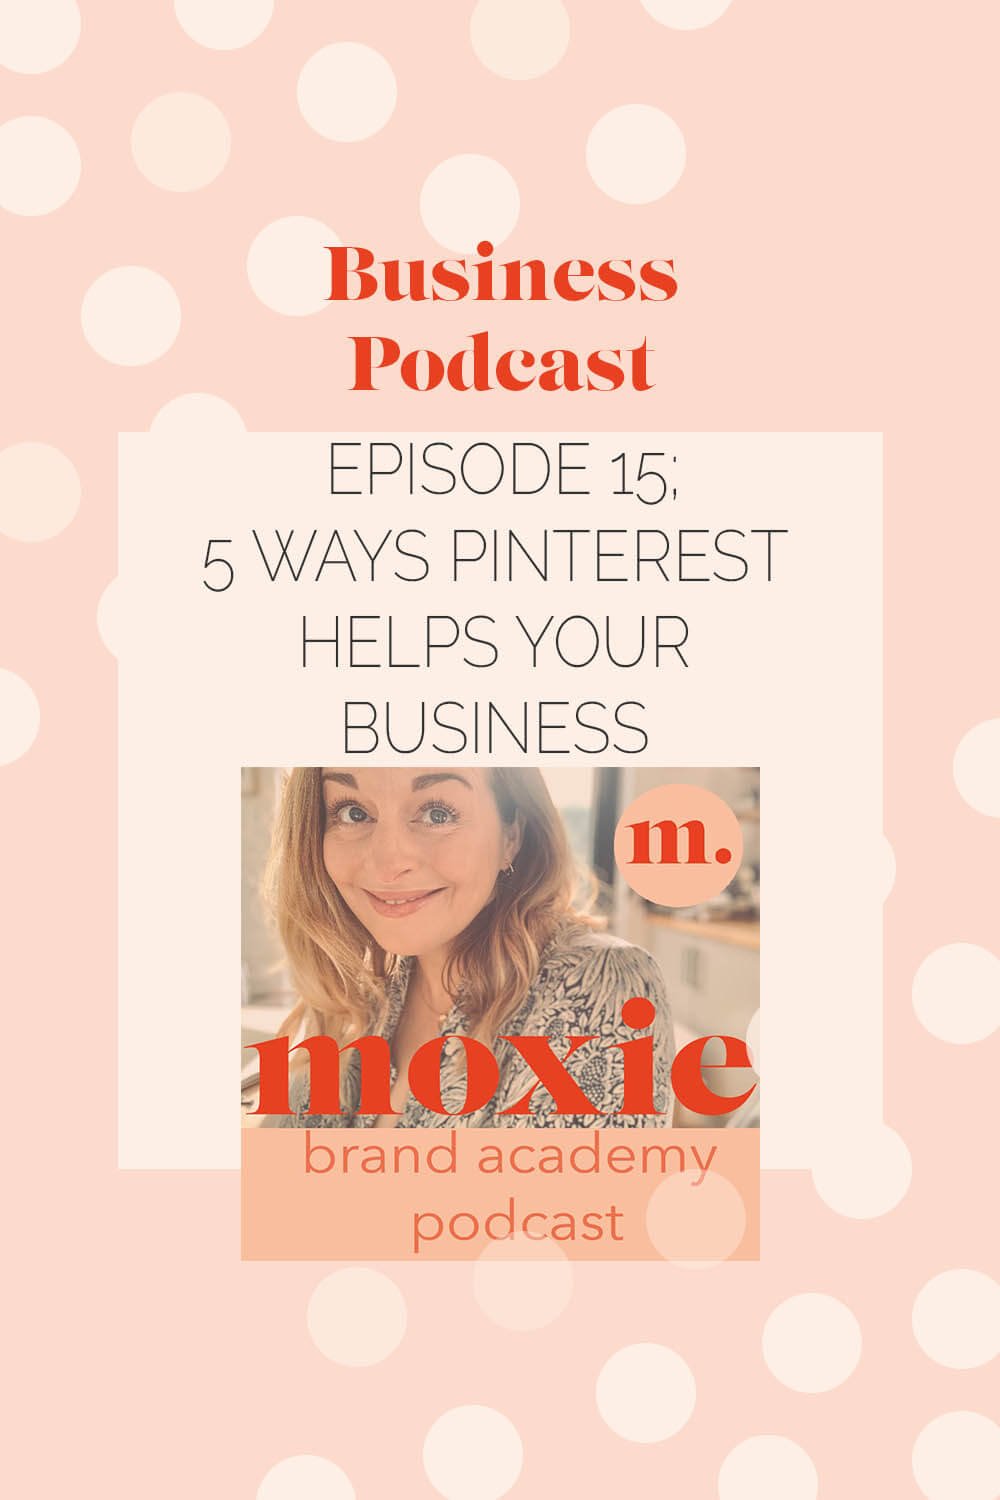 Pinterest helps you grow your business